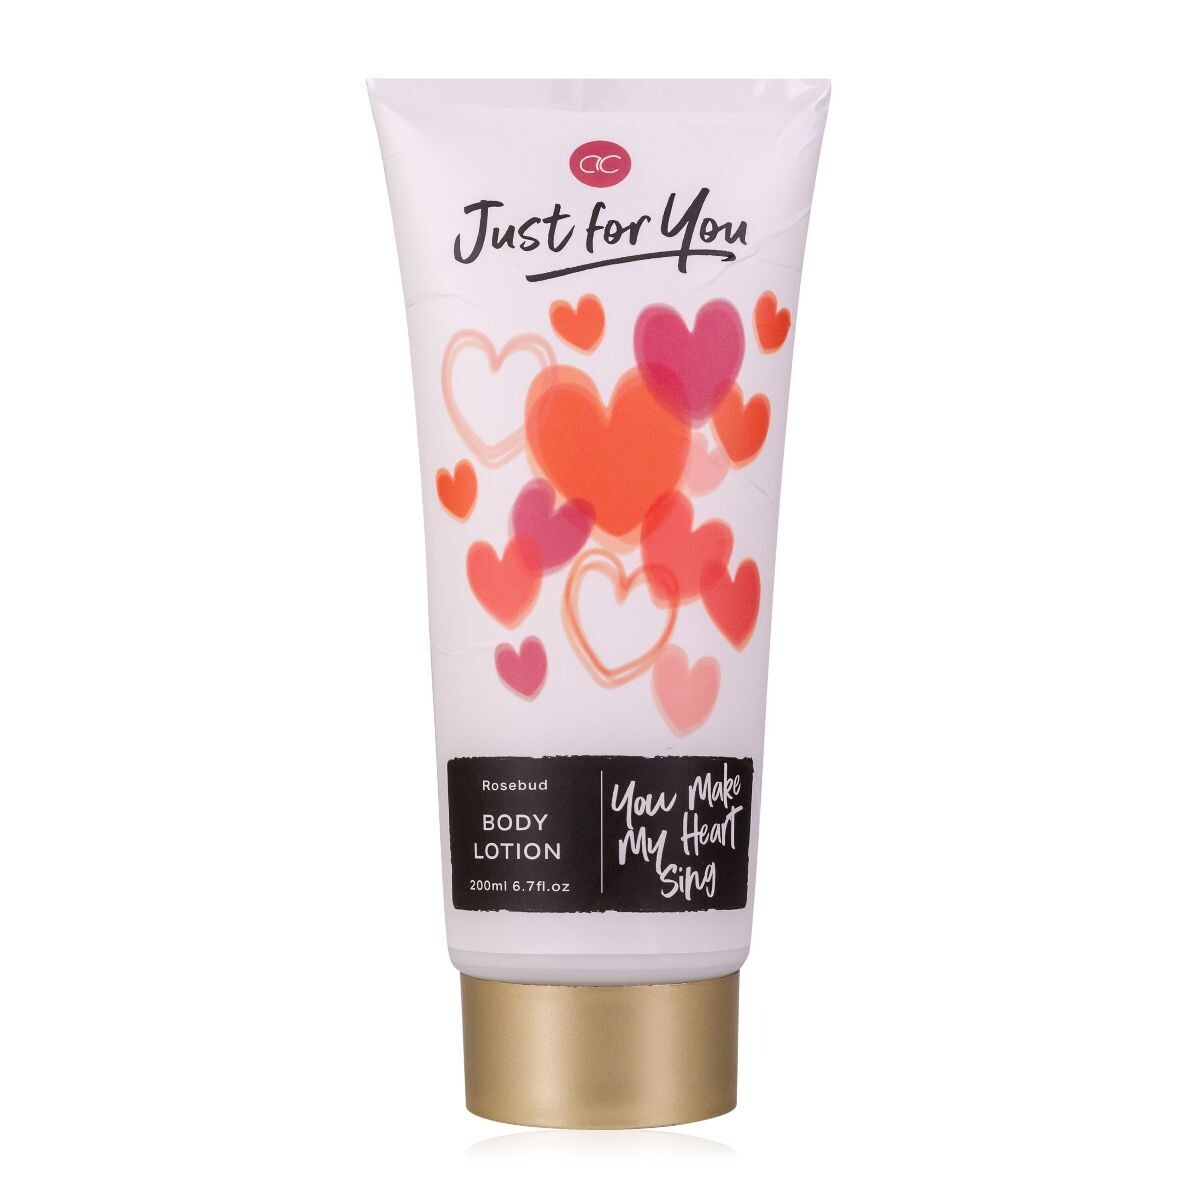 Body Lotion Just for You, 200ml, Rosebud